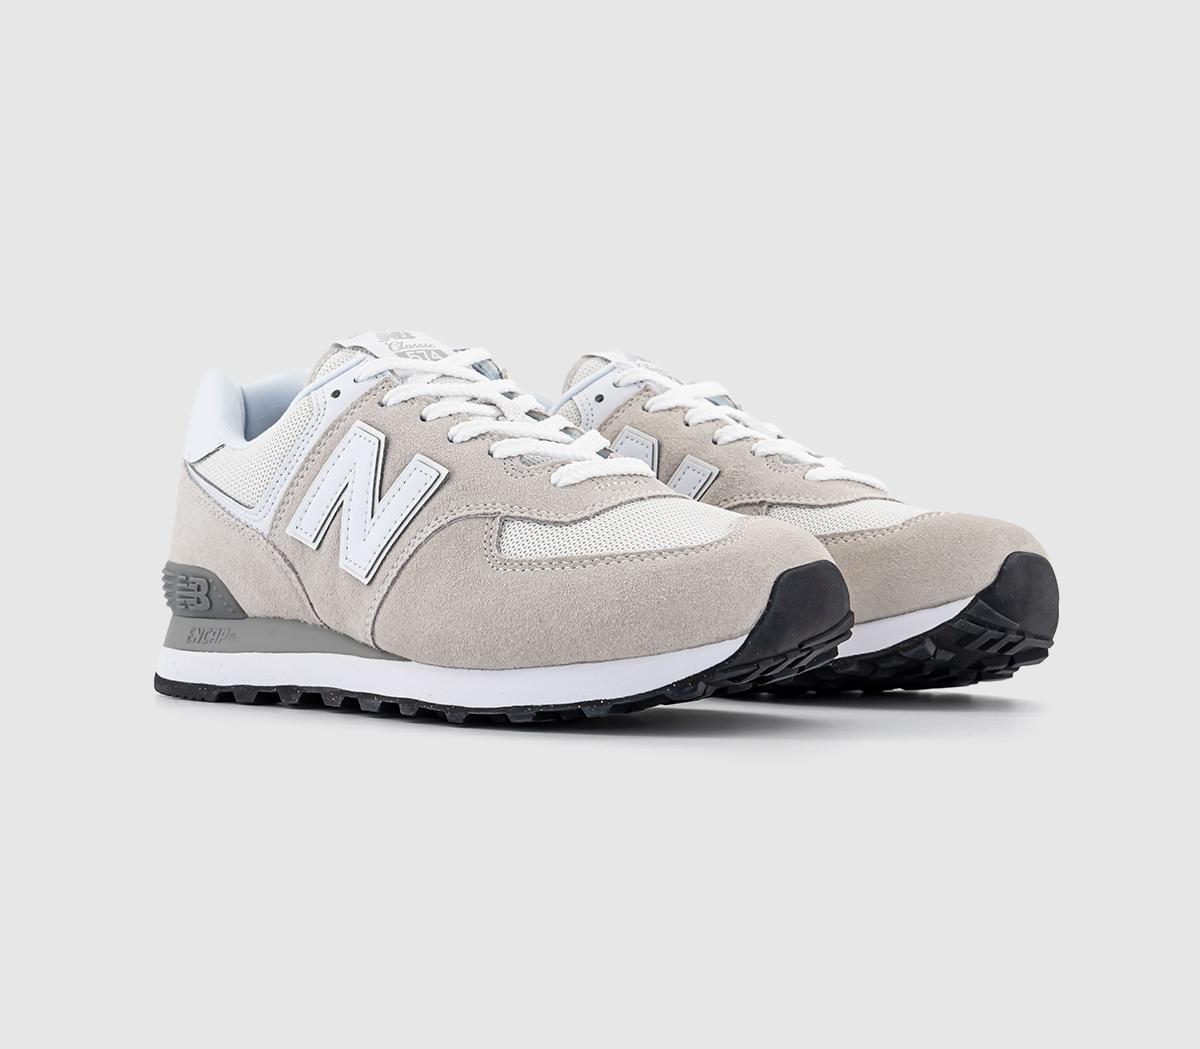 New Balance Mens 574 Trainers Light Grey White Black Green Leaf Rubber, 9.5